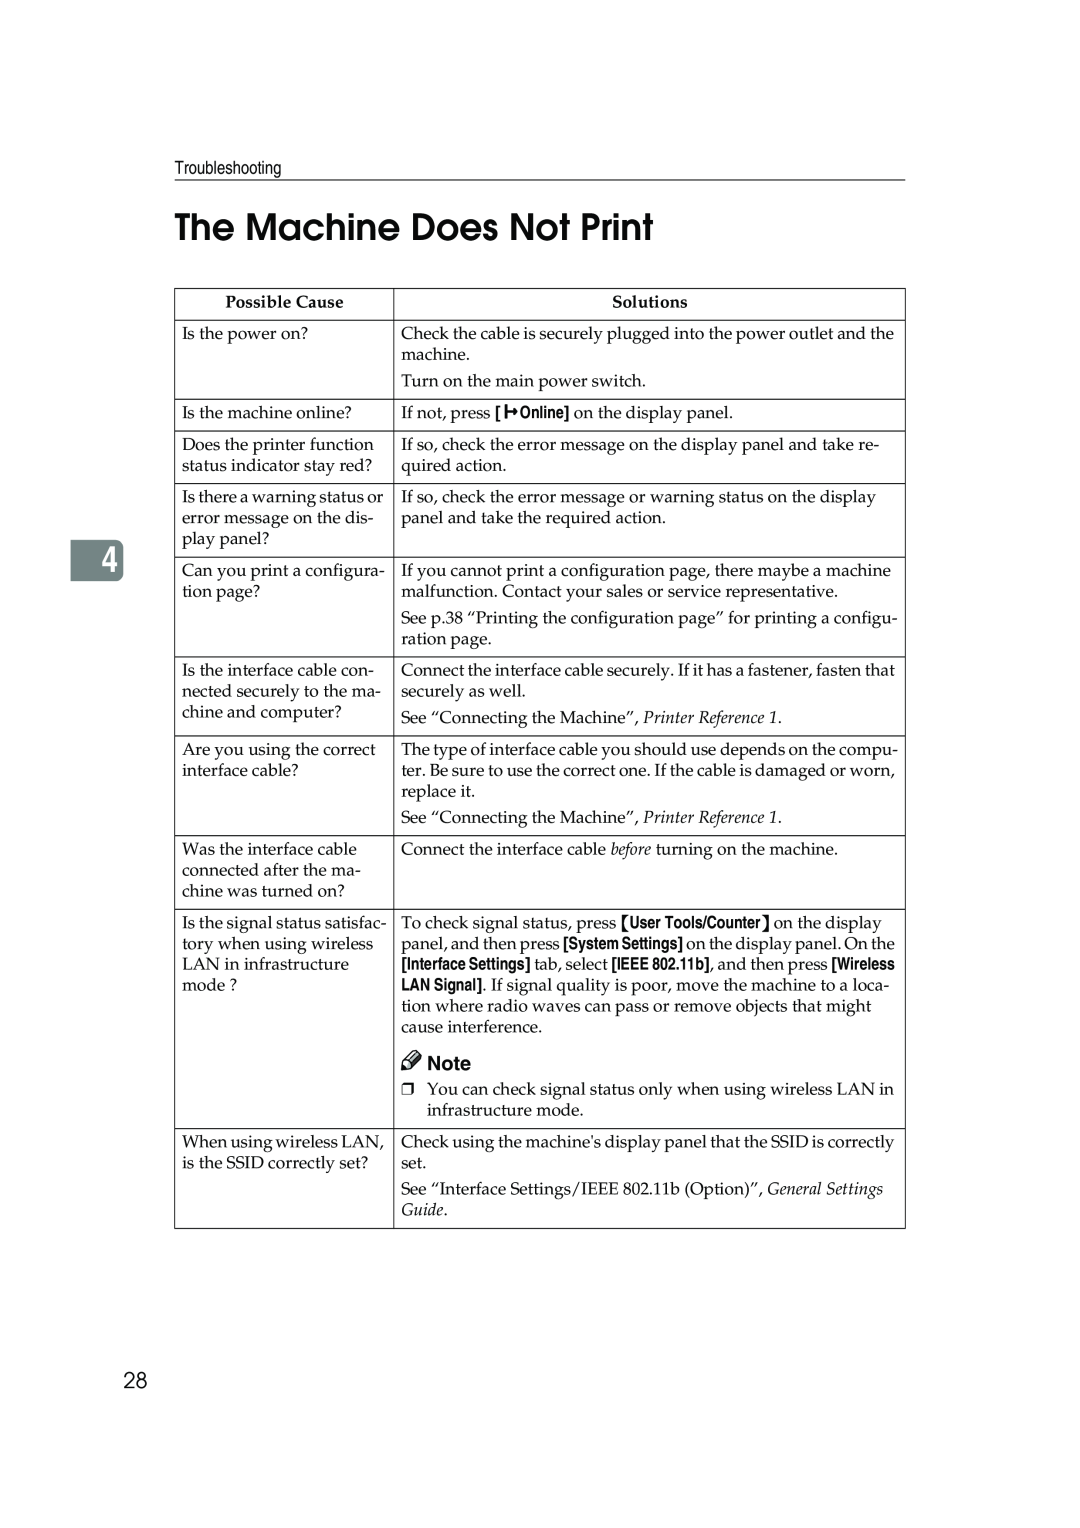 Xerox 2045e appendix The Machine Does Not Print, Possible Cause, Solutions, Guide 